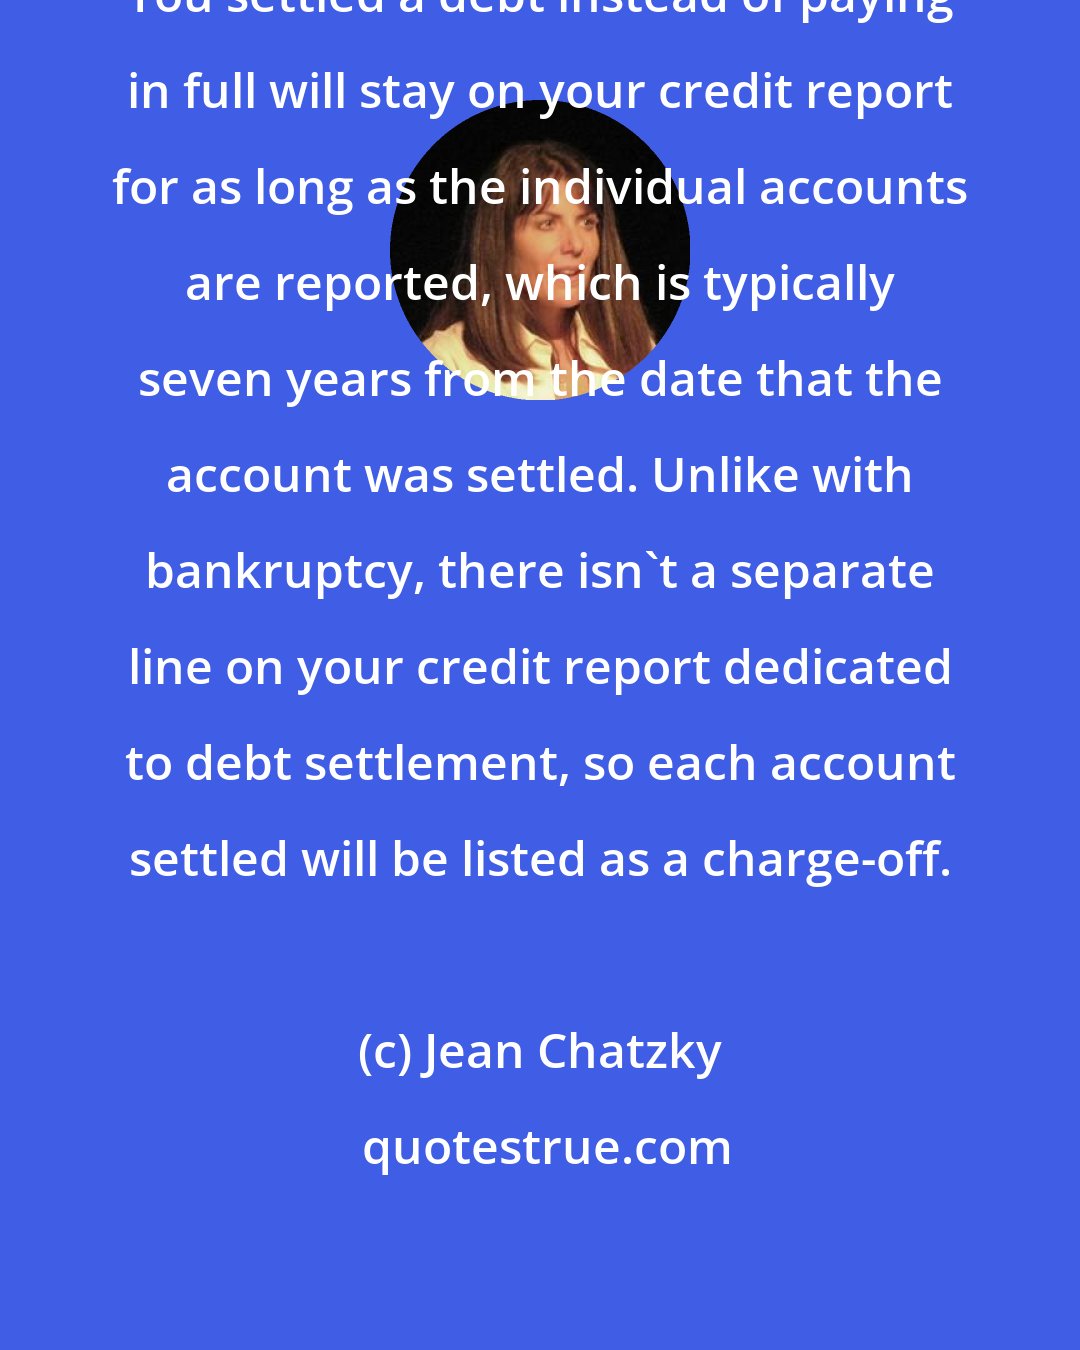 Jean Chatzky: You settled a debt instead of paying in full will stay on your credit report for as long as the individual accounts are reported, which is typically seven years from the date that the account was settled. Unlike with bankruptcy, there isn't a separate line on your credit report dedicated to debt settlement, so each account settled will be listed as a charge-off.